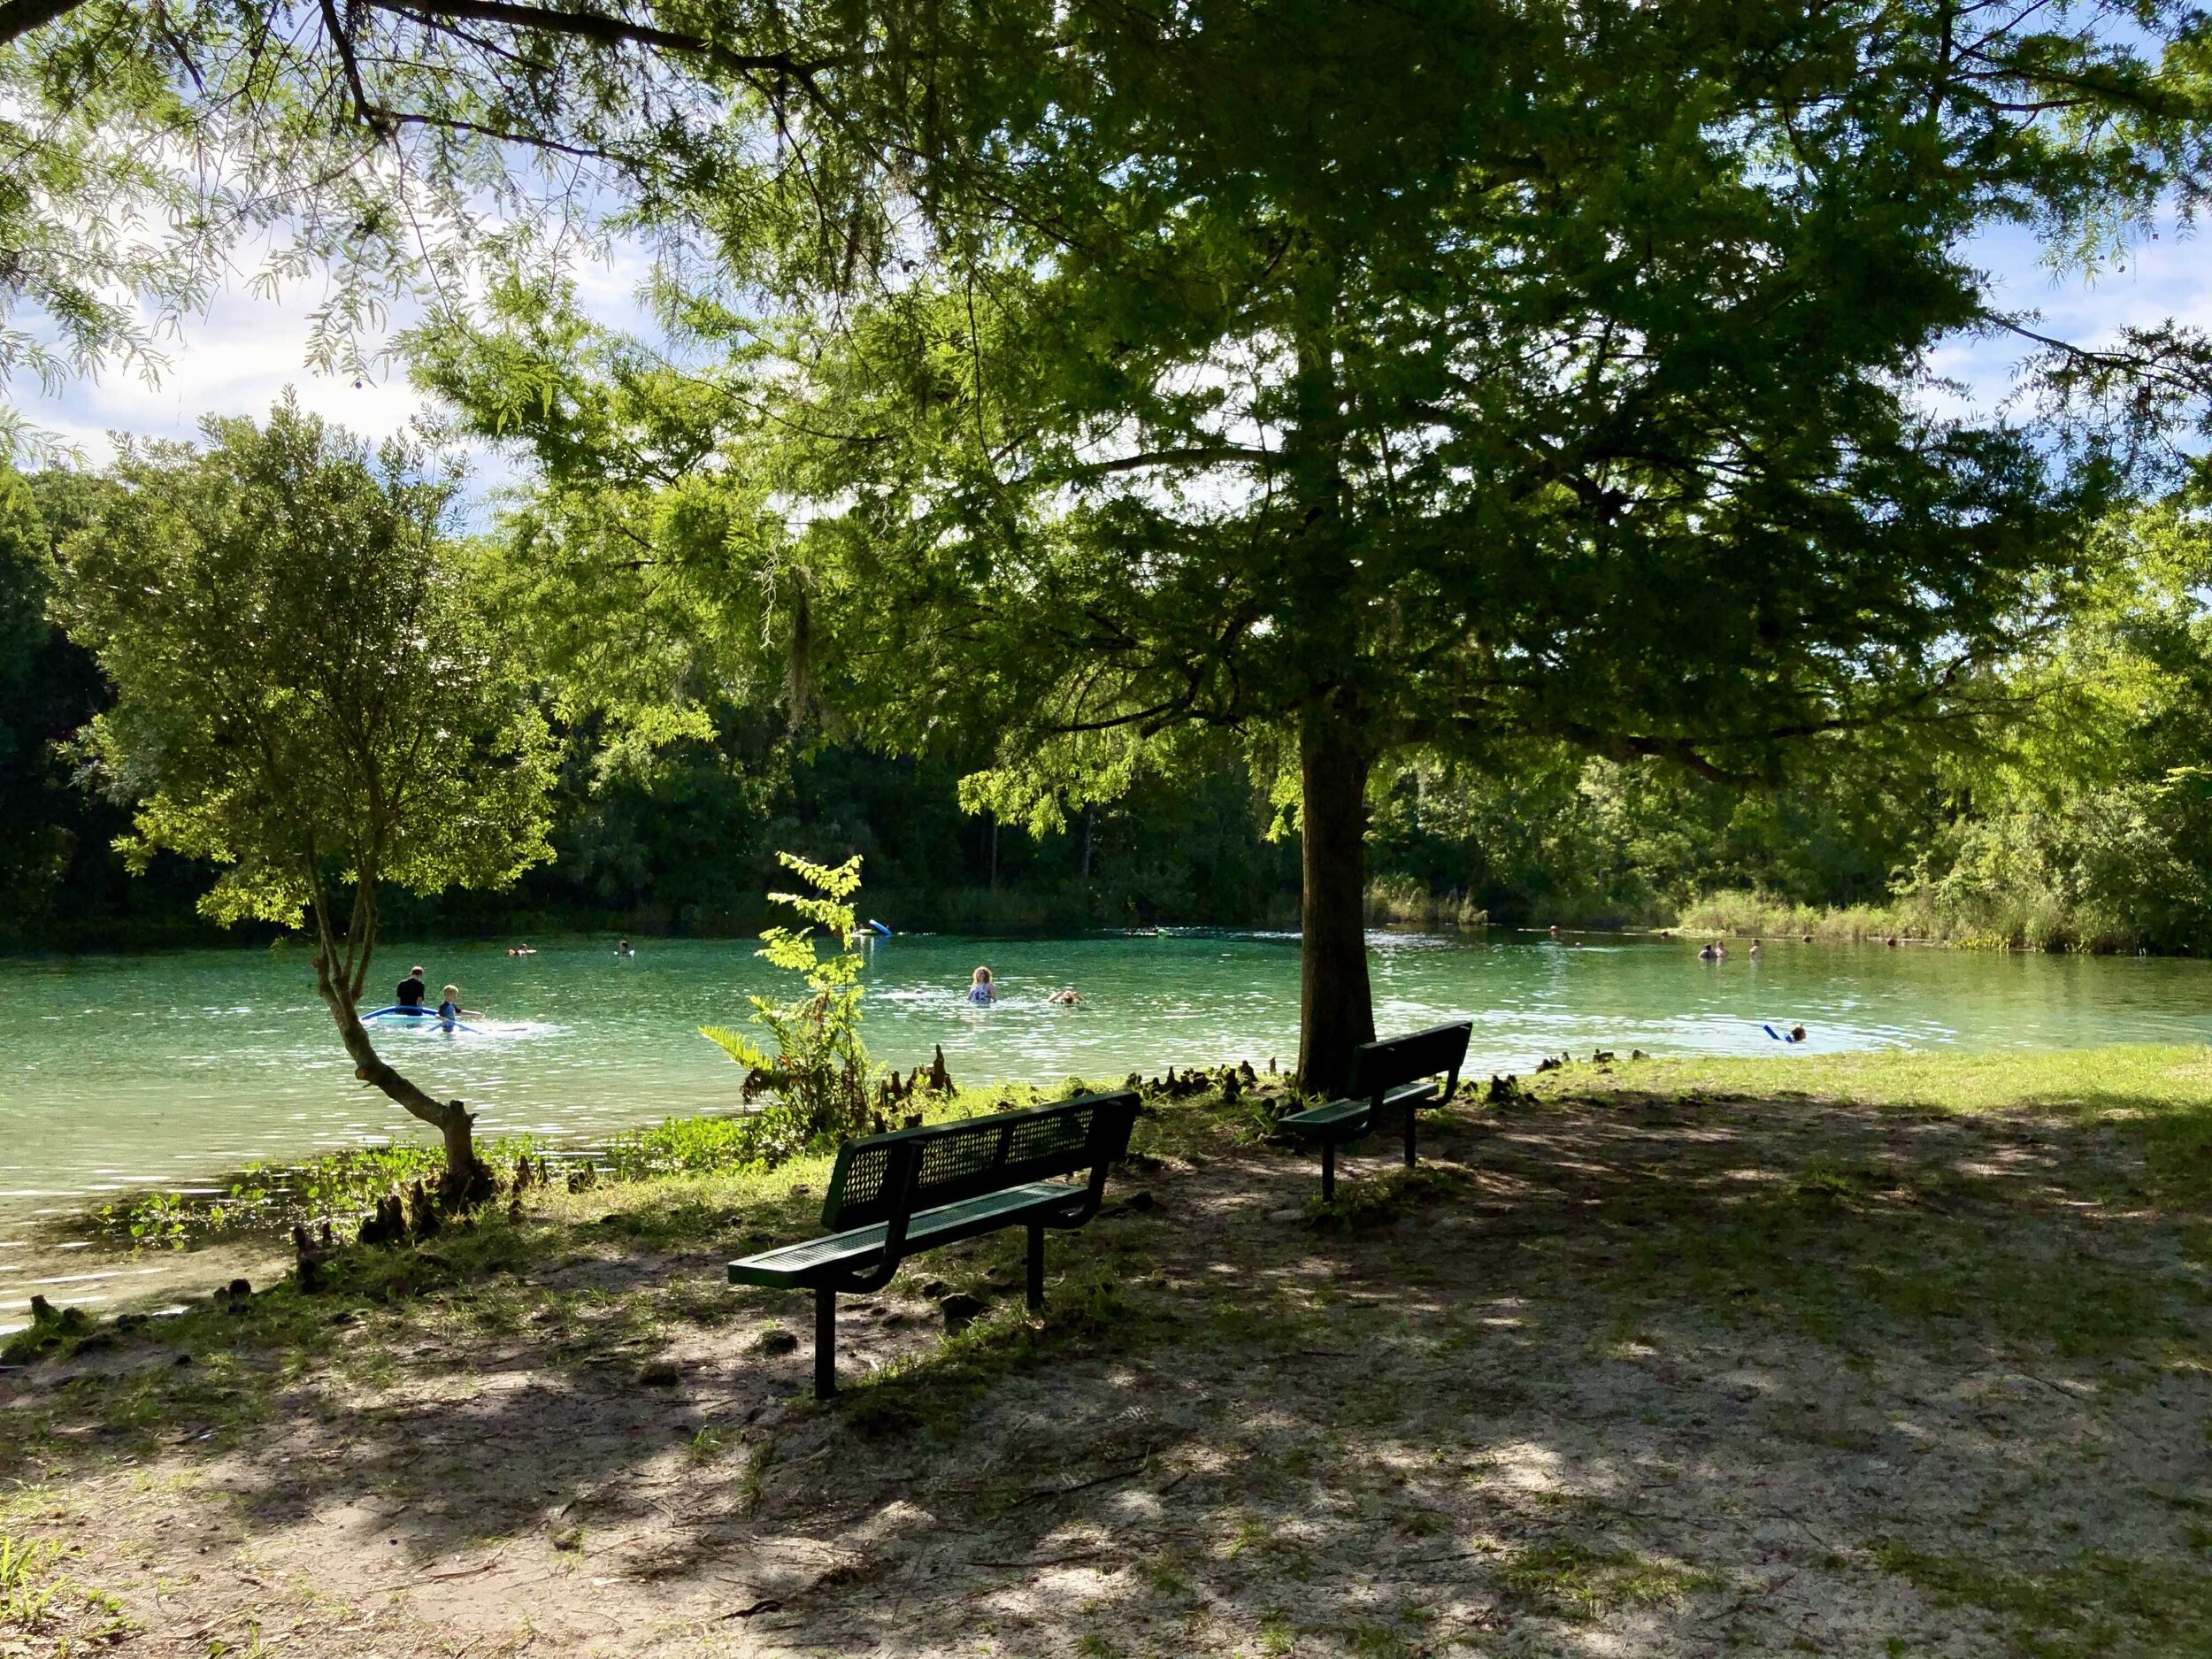  One of the crystal clear springs found in Ocala National Forest 